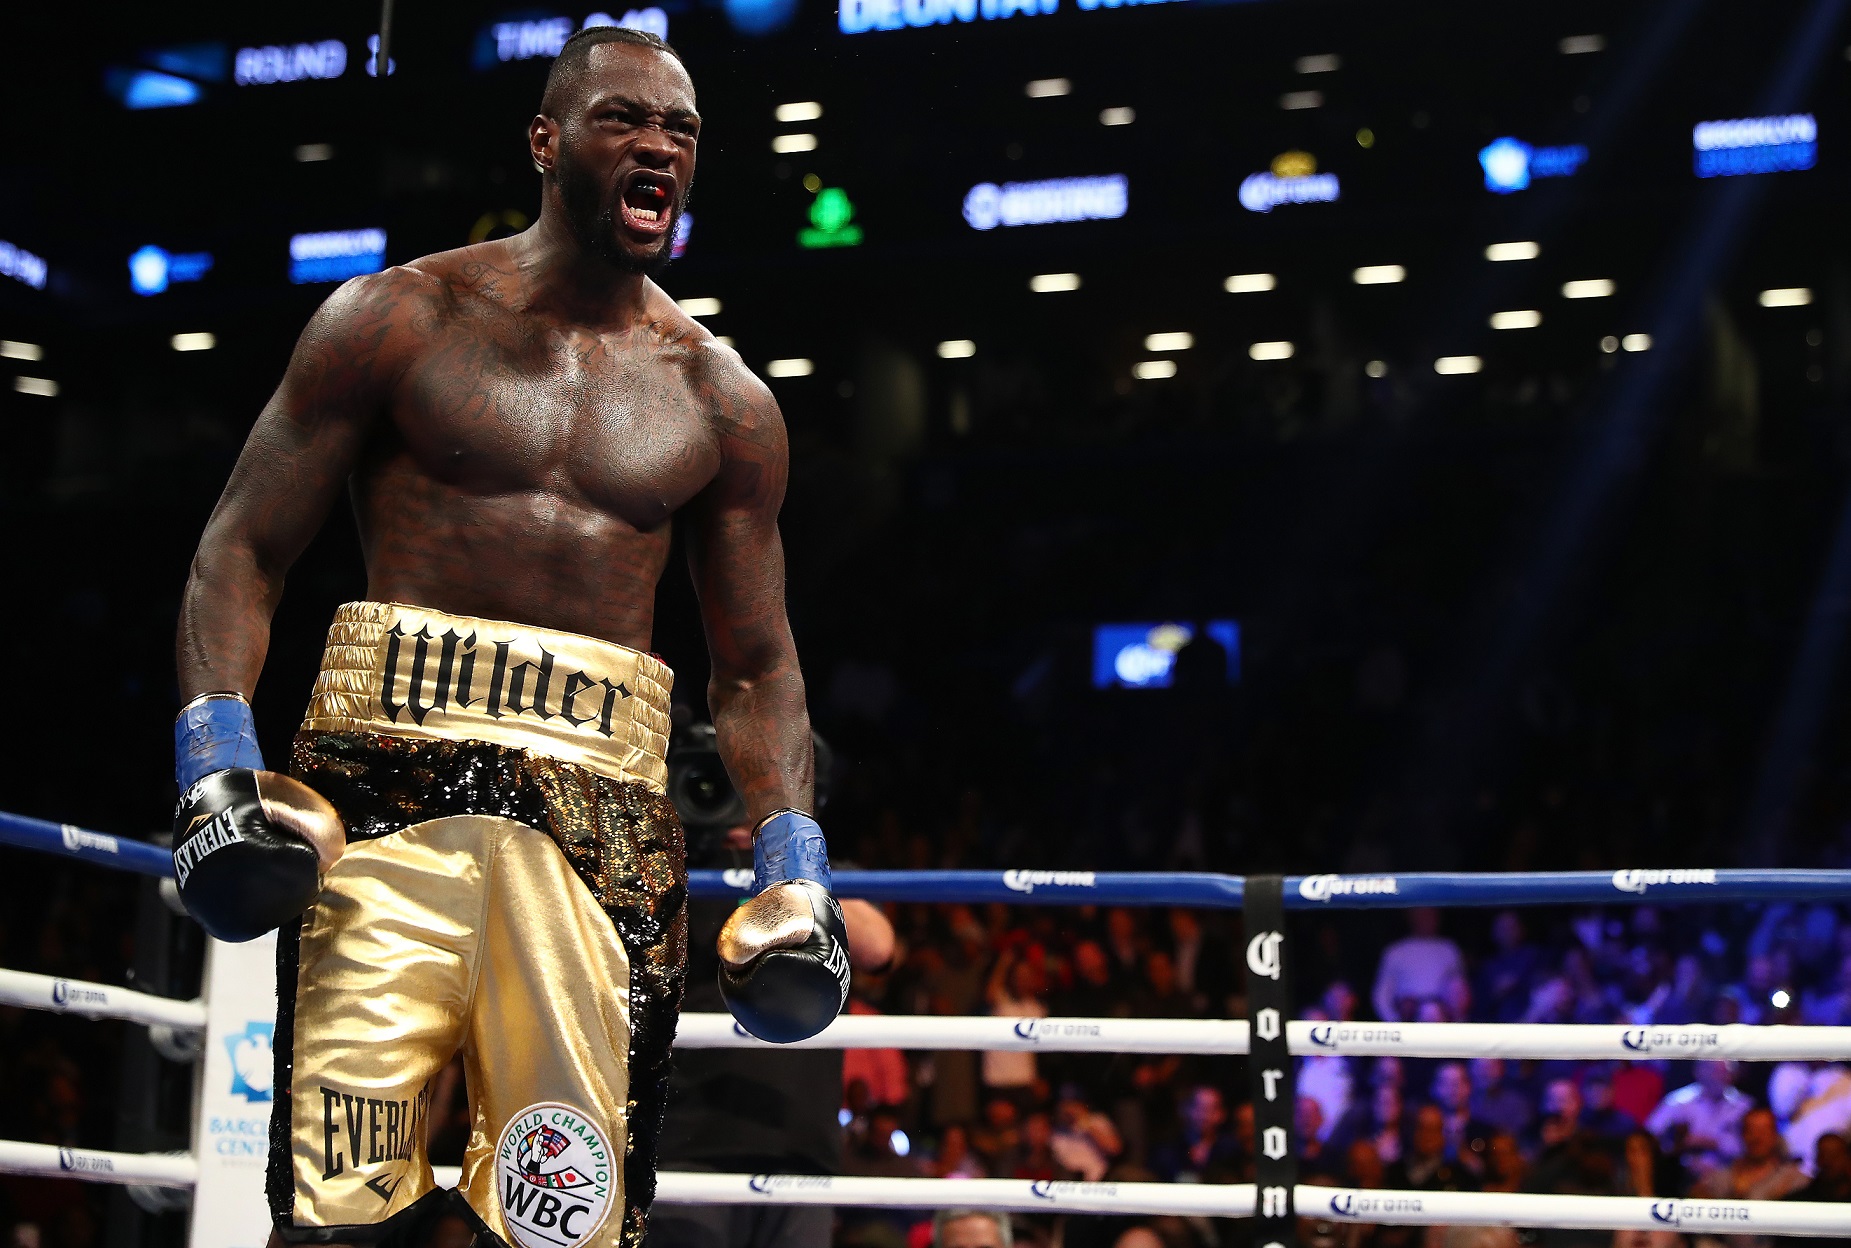 Deontay Wilder celebrates after knocking down Bermane Stiverne. Pic: Al Bello/Getty Images